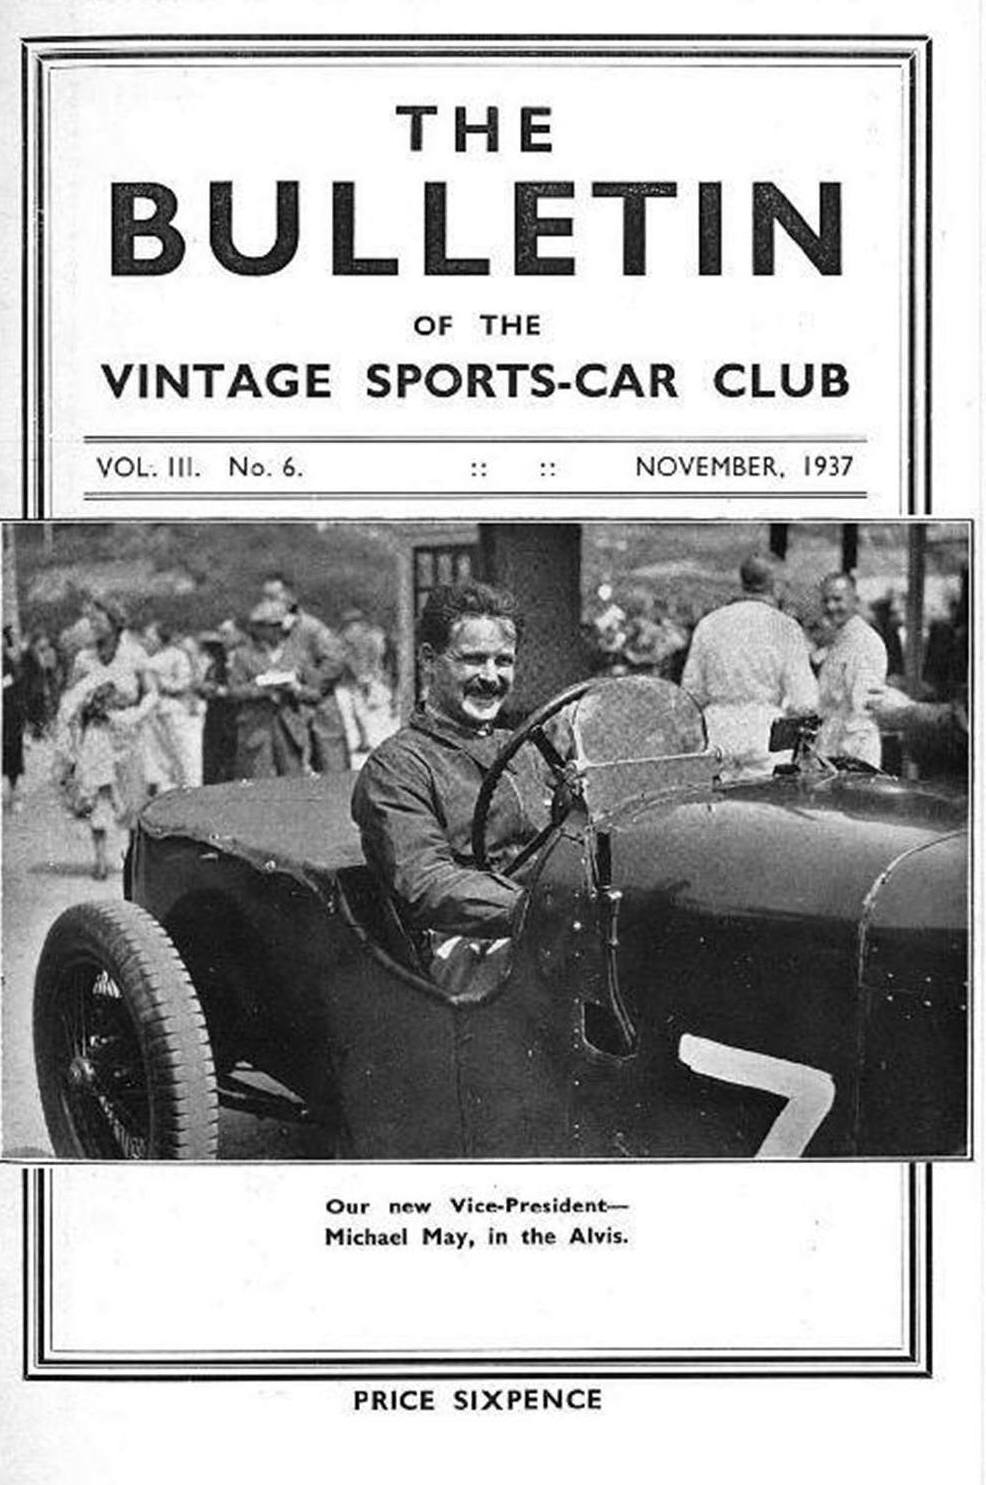 Croydon 05/09/1937.......    Winterslow Rally........    A Watch on the Winged Bentley cover